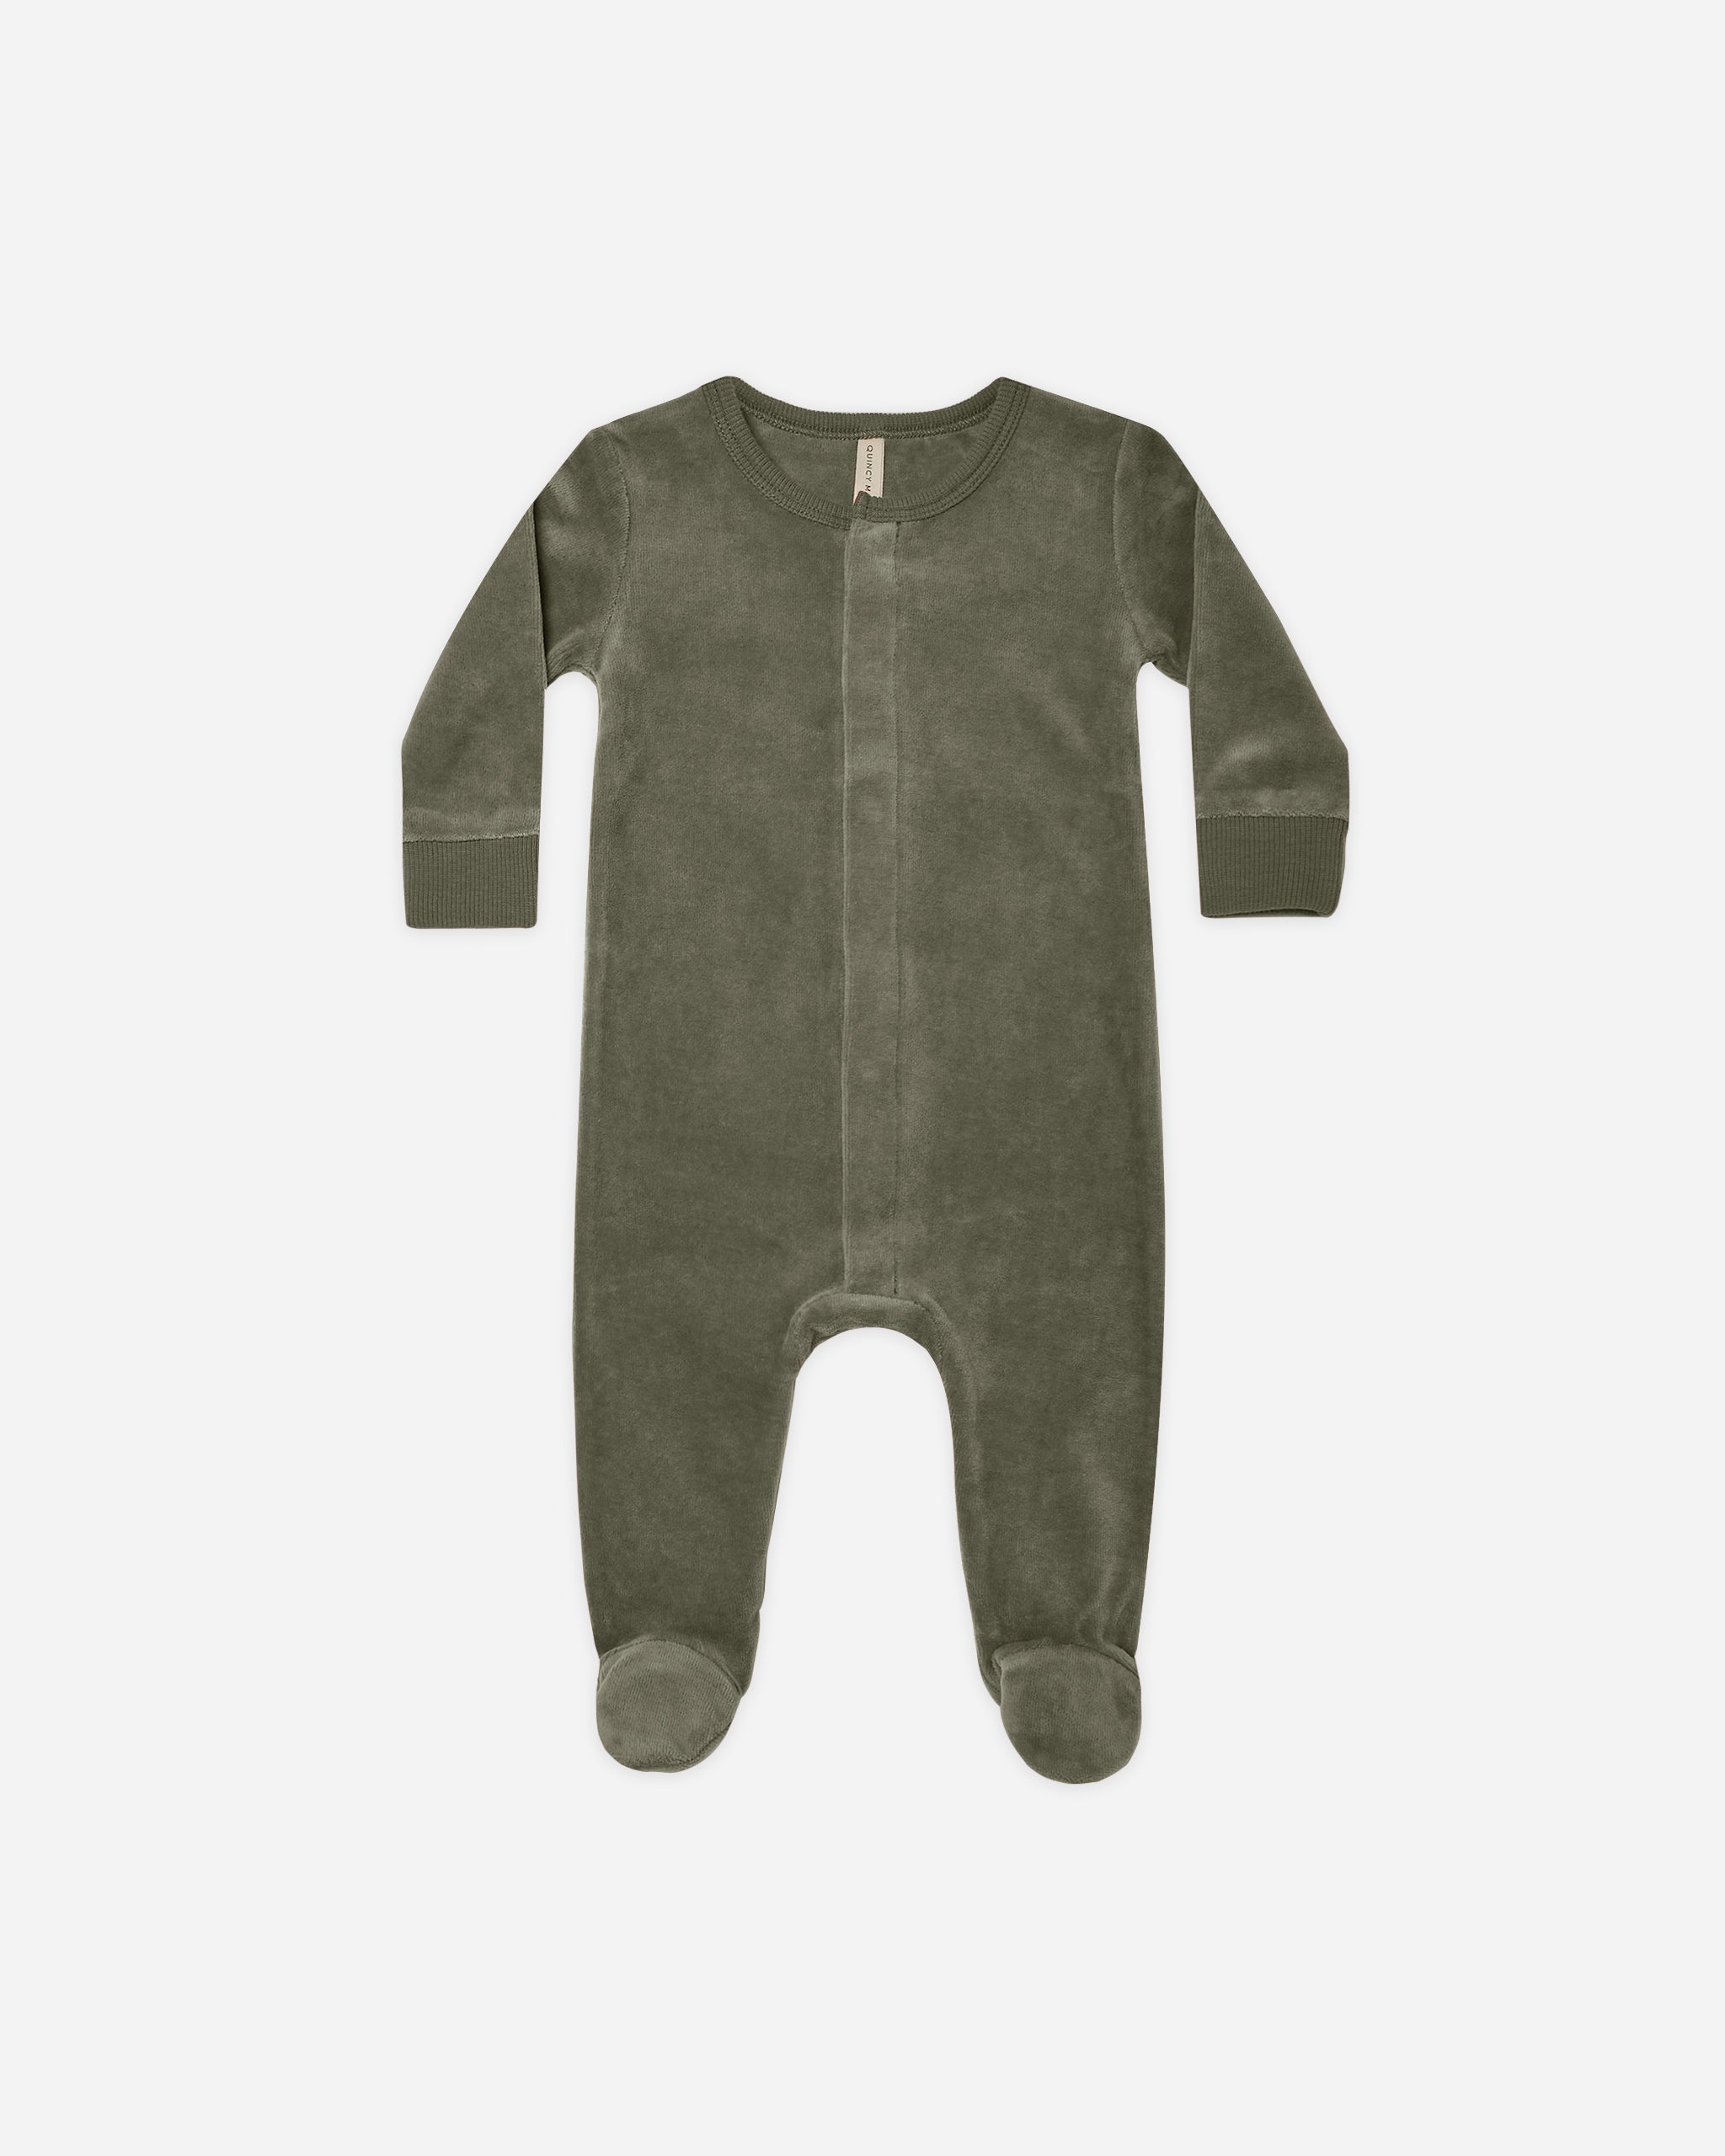 Velour Hidden Snap Footie || Forest - Rylee + Cru | Kids Clothes | Trendy Baby Clothes | Modern Infant Outfits |